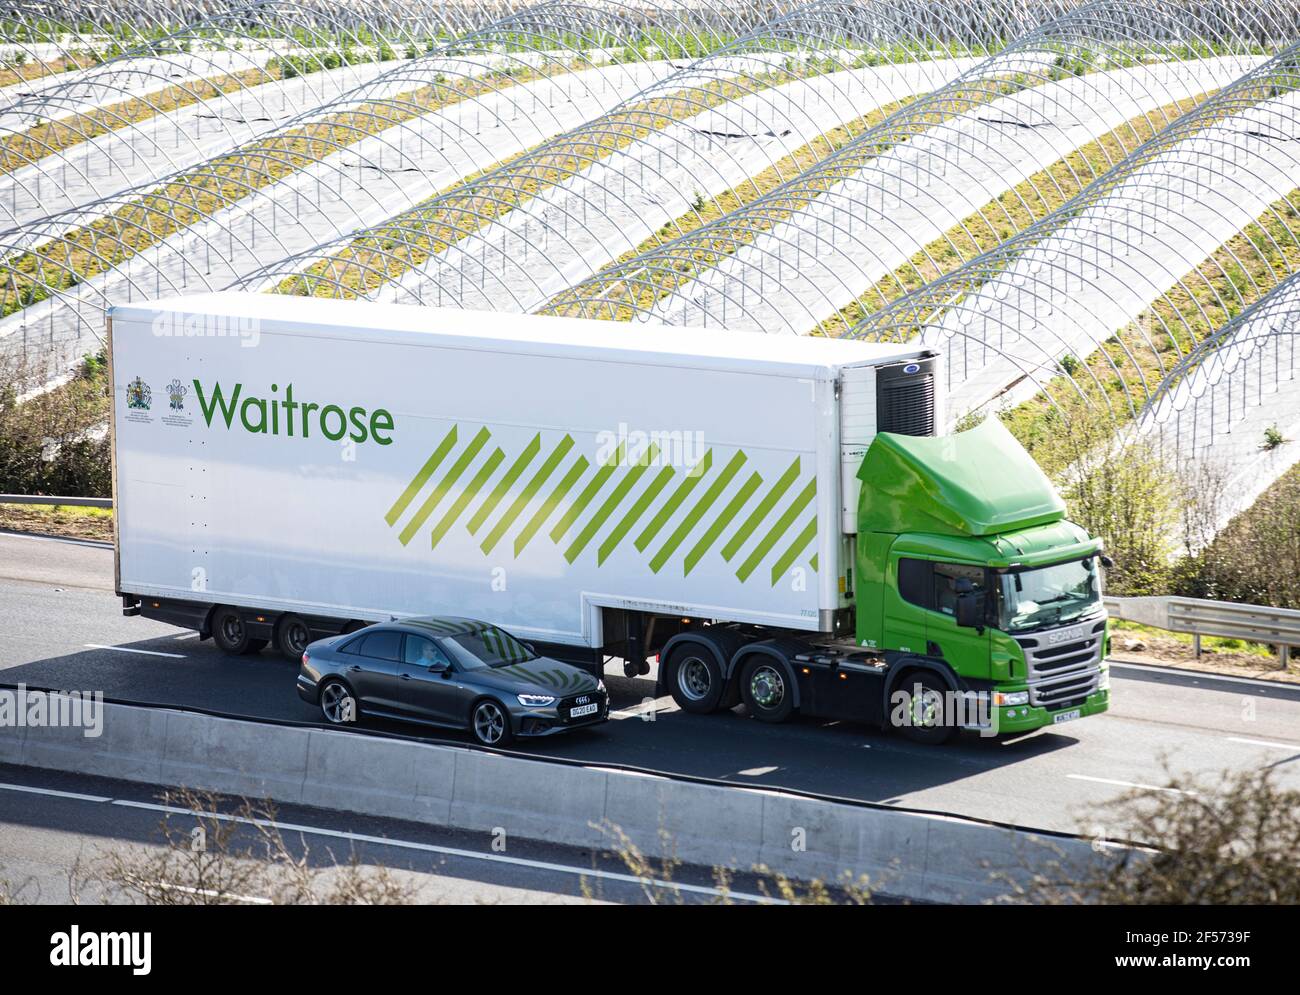 A Waitrose delivery lorry heads down the motorway passed fields of poly tunnels in the sunshine Stock Photo